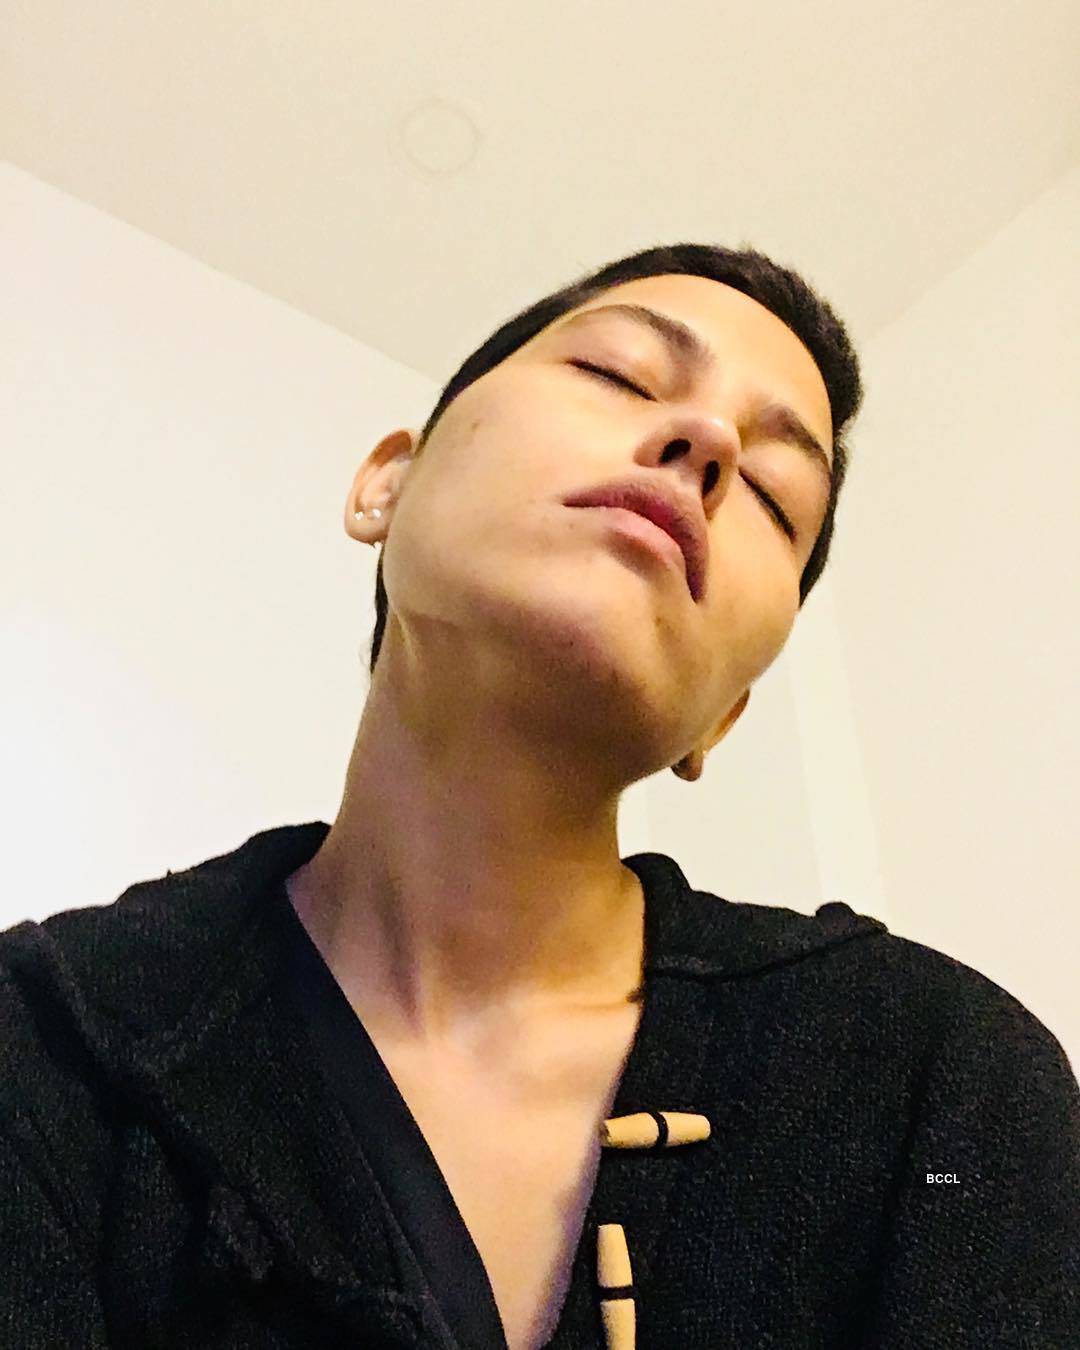 Priya Singh's transition from cascading hair to a buzz cut